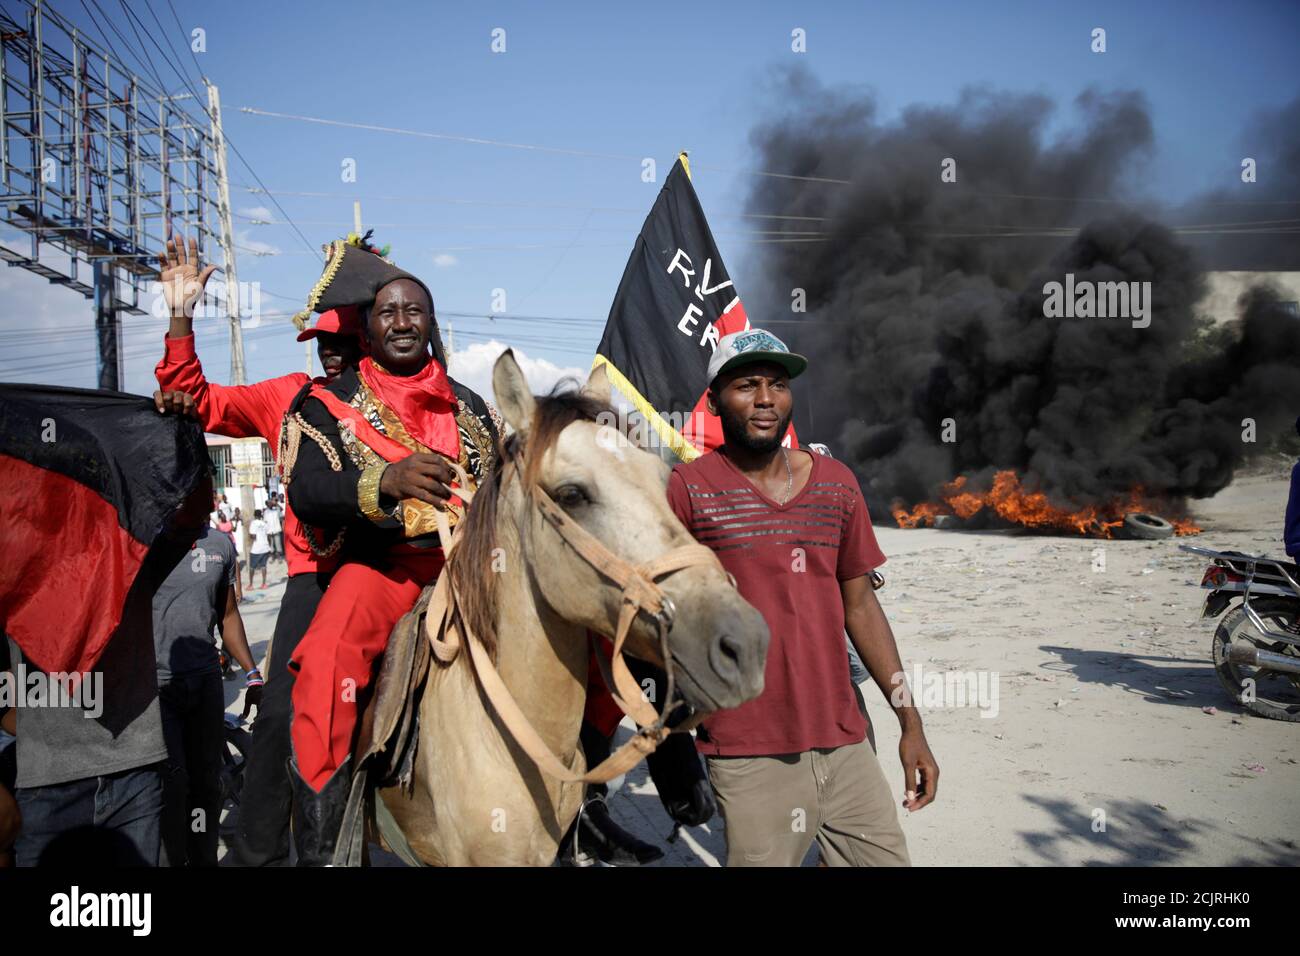 A man dressed as Haitian Revolution leader Jean-Jacques Dessalines rides a  horse together with Piti Desalin political party president, Moise Jean- Charles, during a march to demand the resignation of Haitian President  Jovenel